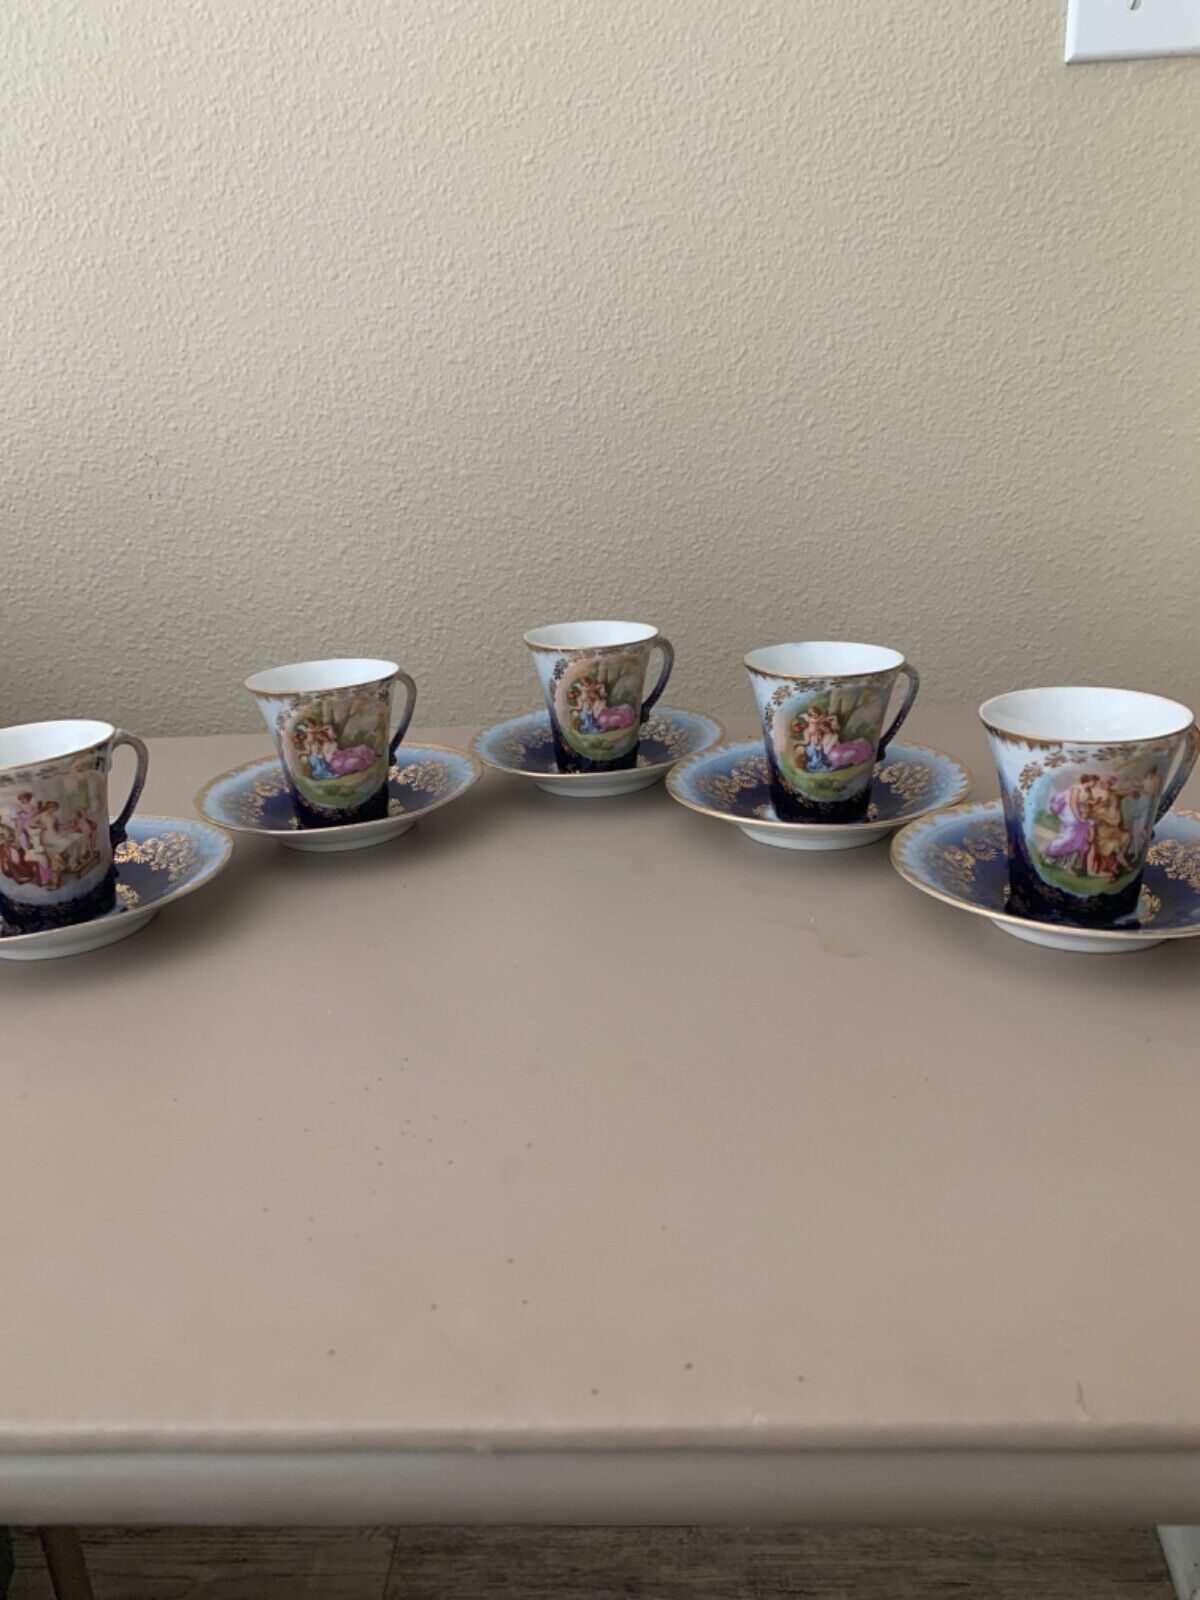 Victoria Carlsbad Teacup and Saucer Set of 5